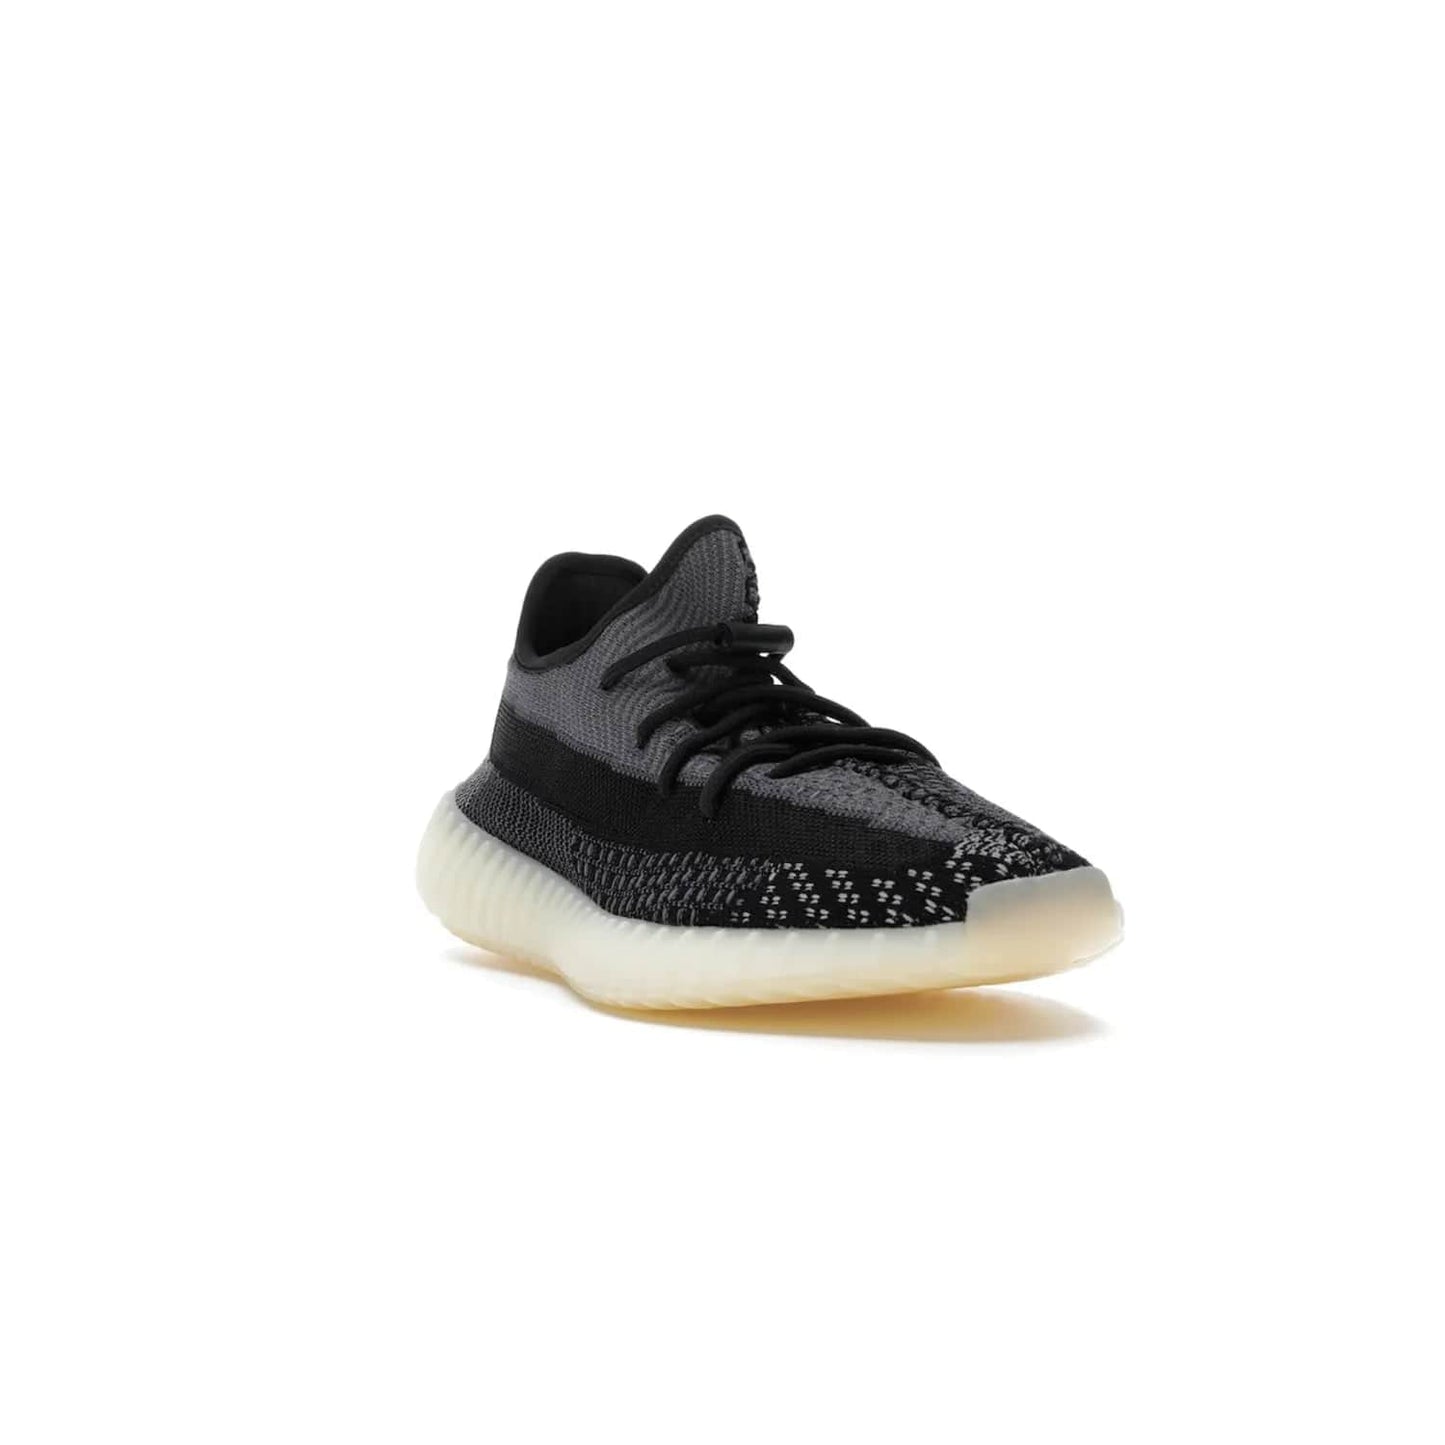 adidas Yeezy Boost 350 V2 Carbon - Image 7 - Only at www.BallersClubKickz.com - Introducing the adidas Yeezy Boost 350 V2 Carbon. Iconic sneaker with a dark-hued upper, breathable Primeknit mesh, signature side stripe, off-white midsole & BOOST cushioning. Perfect for any sneaker lover. Released October 2020.